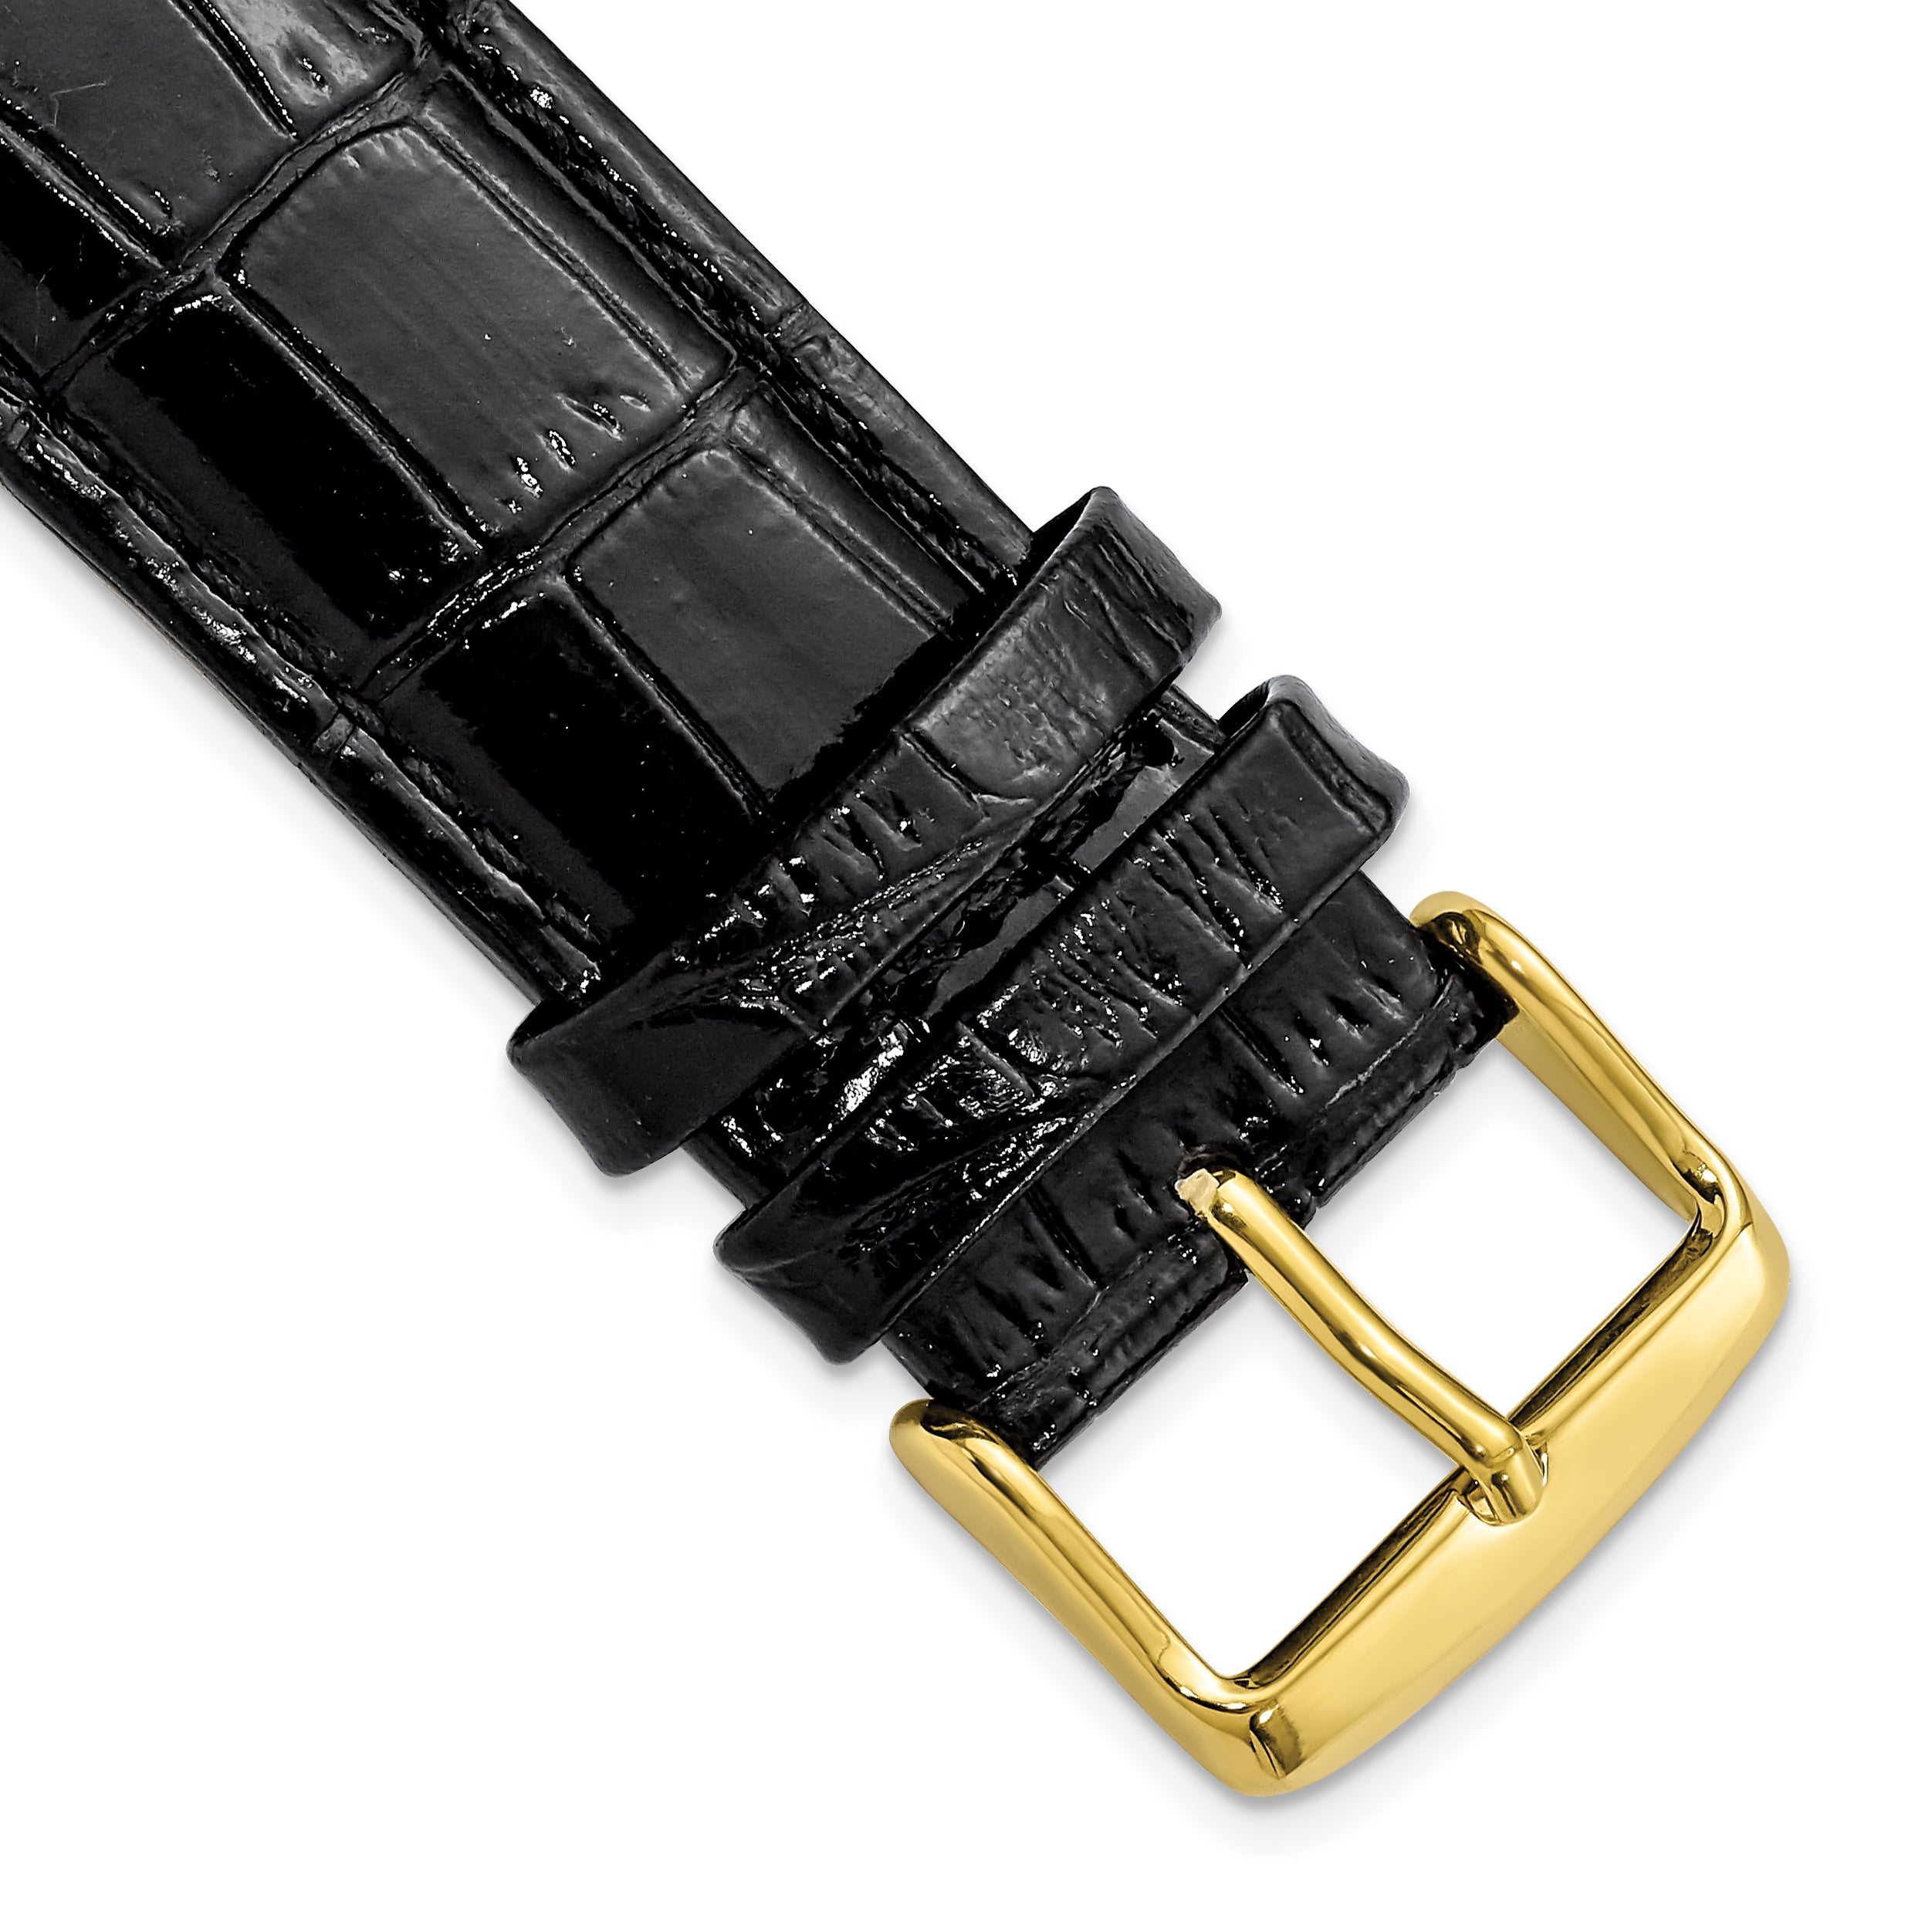 DeBeer 22mm Black Crocodile Grain Chronograph Leather with Gold-tone Buckle 7.5 inch Watch Band